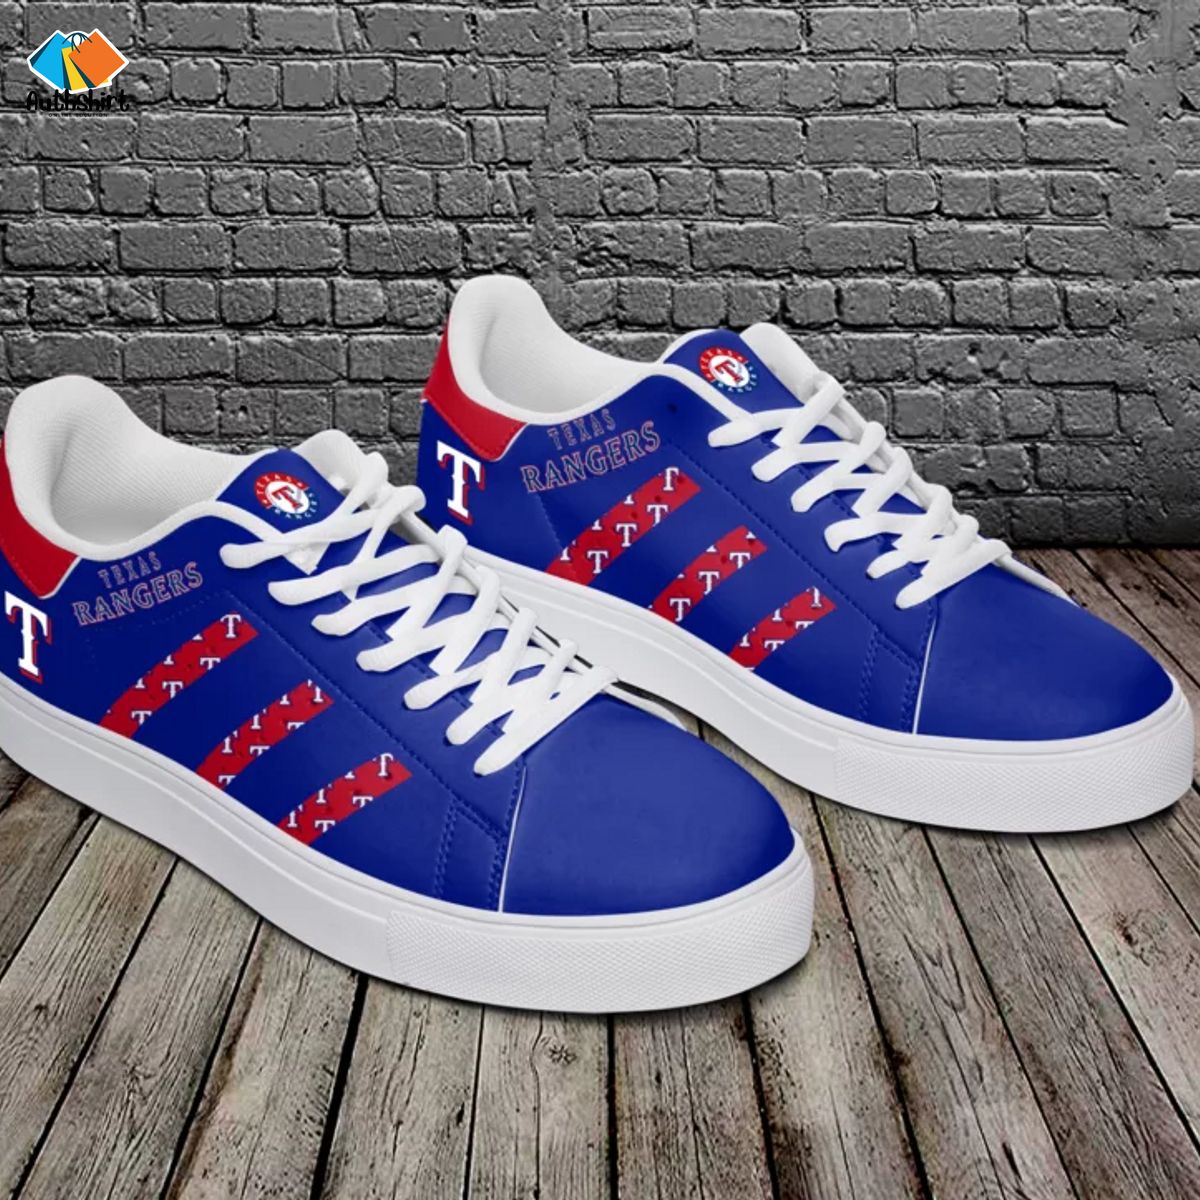 Texas Rangers NHL Stripes Styles Stan Smith Shoes Ver 2